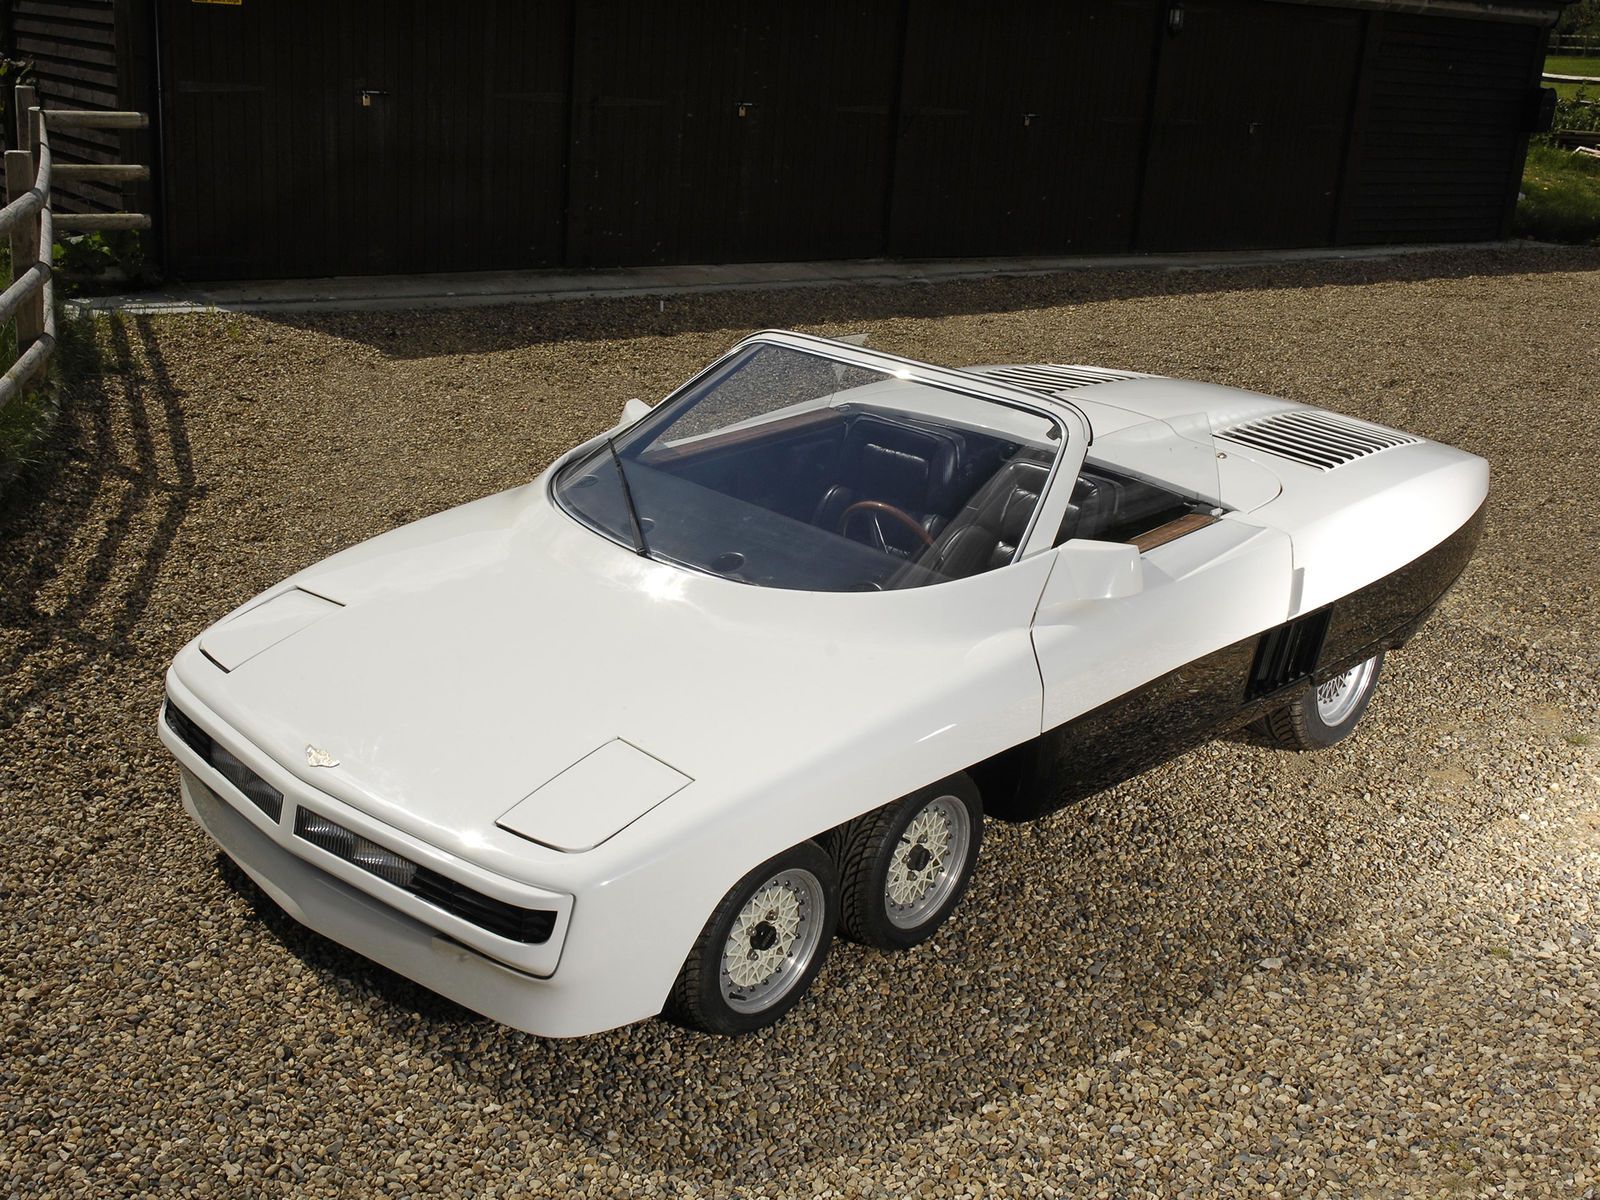 30 incredibly bonkers and beautiful cars from the 1950s to now image 28